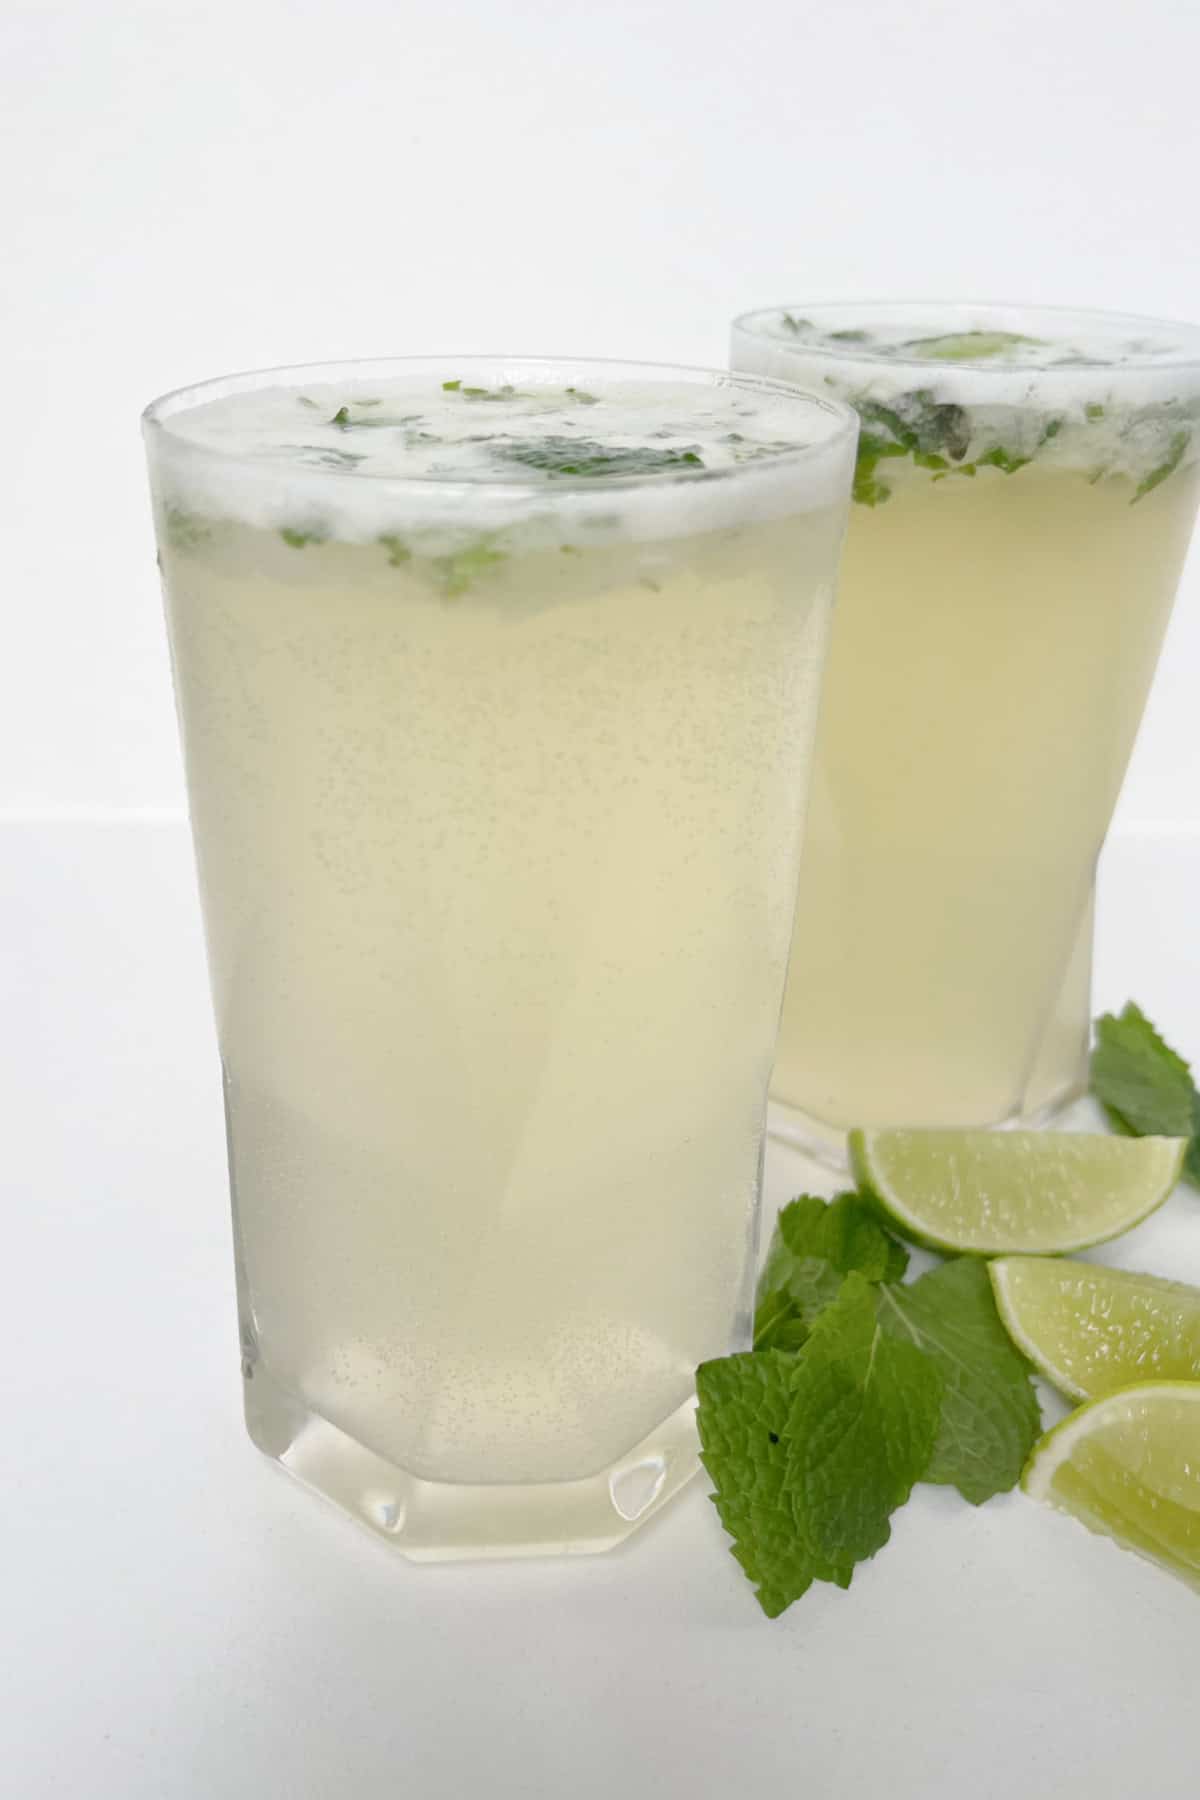 Side view of two glasses filled with Mojito cocktails. Mint leaves and lime wedges are sitting next to the glasses.